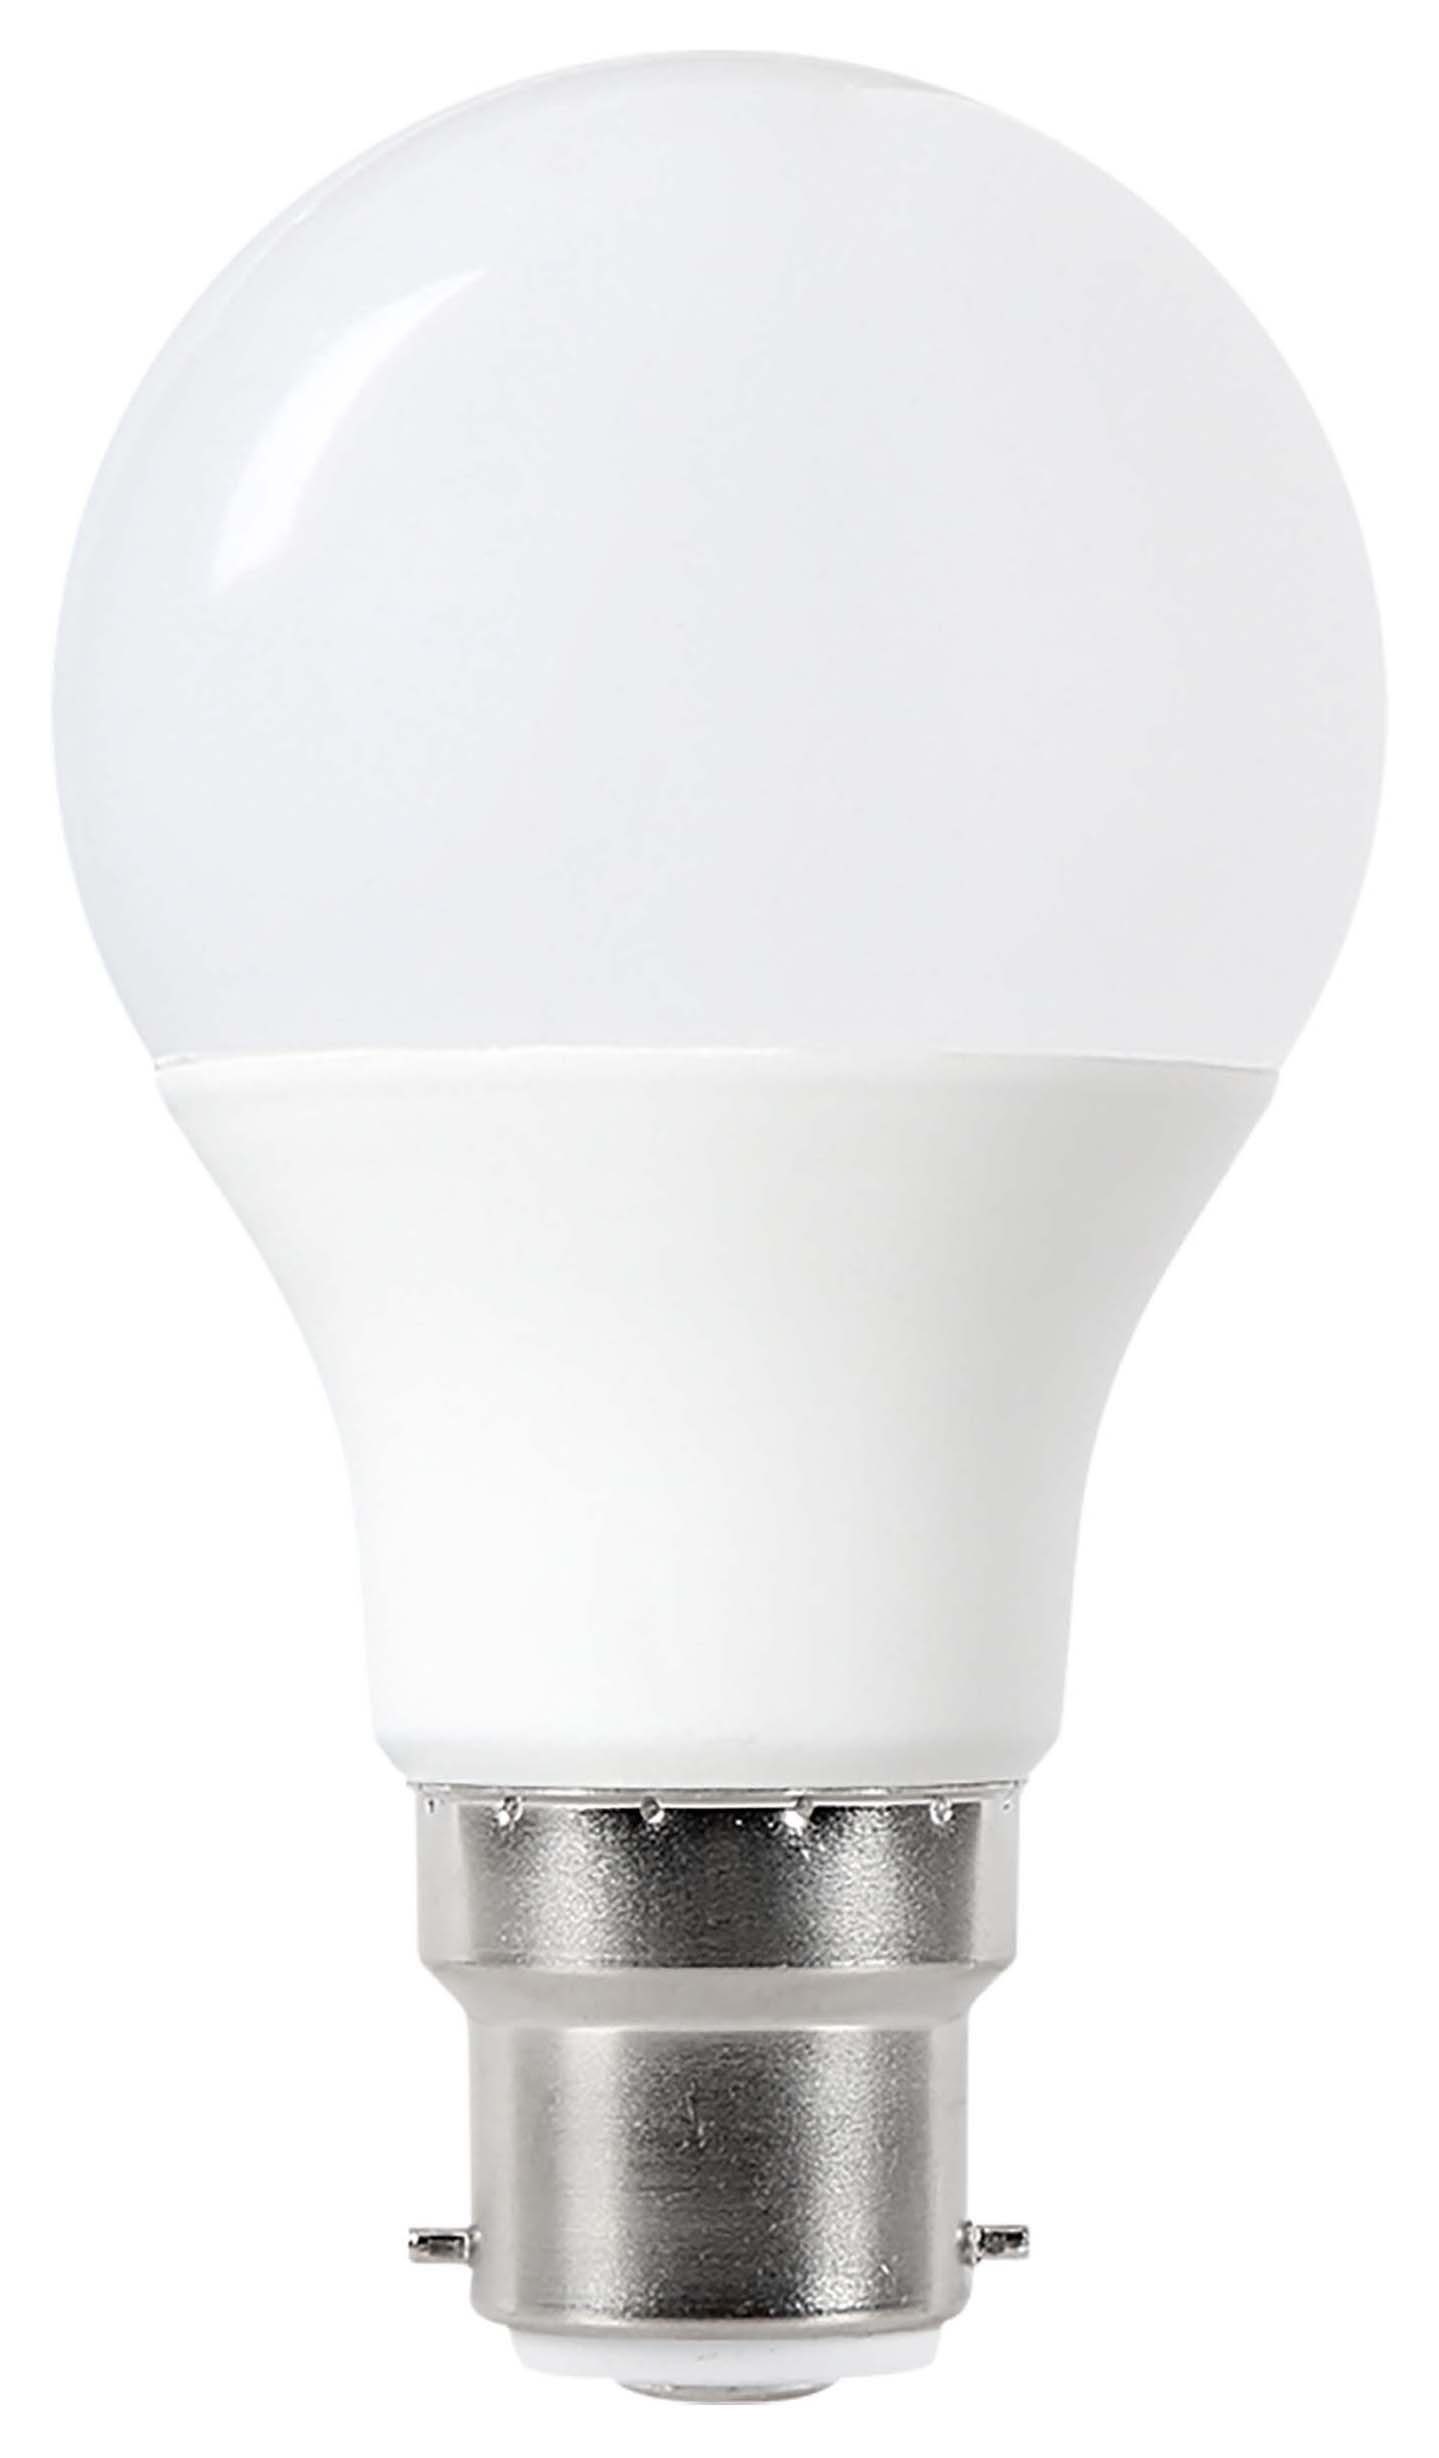 Wickes Non-Dimmable GLS Opal LED B22 8.8W Cool White Light Bulb - Pack of 4